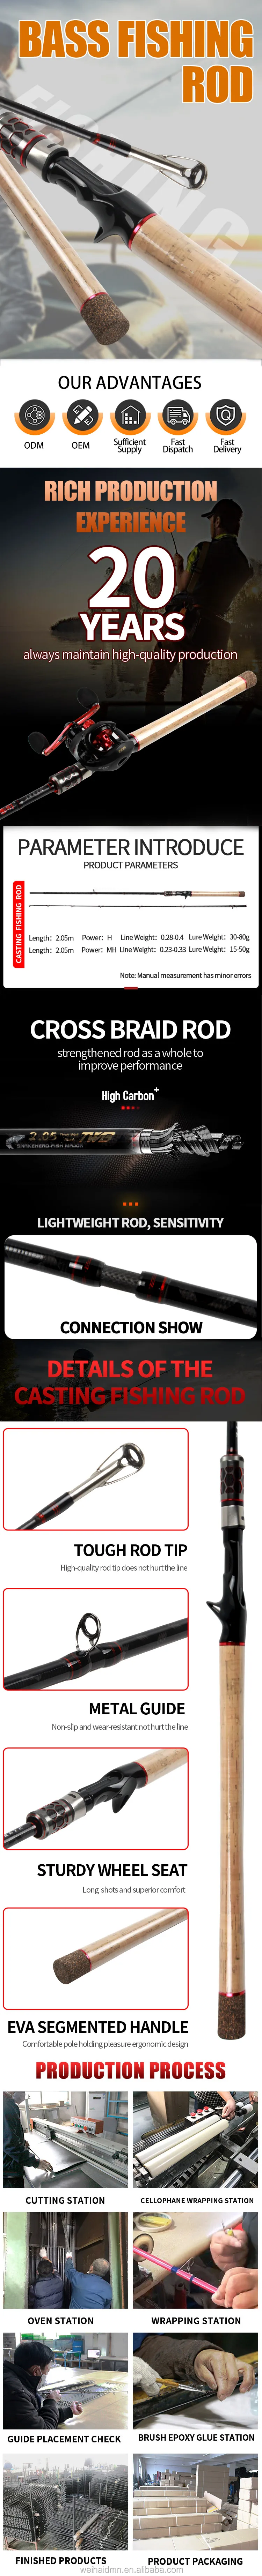 High Carbon Guide Ring Rods Fishing